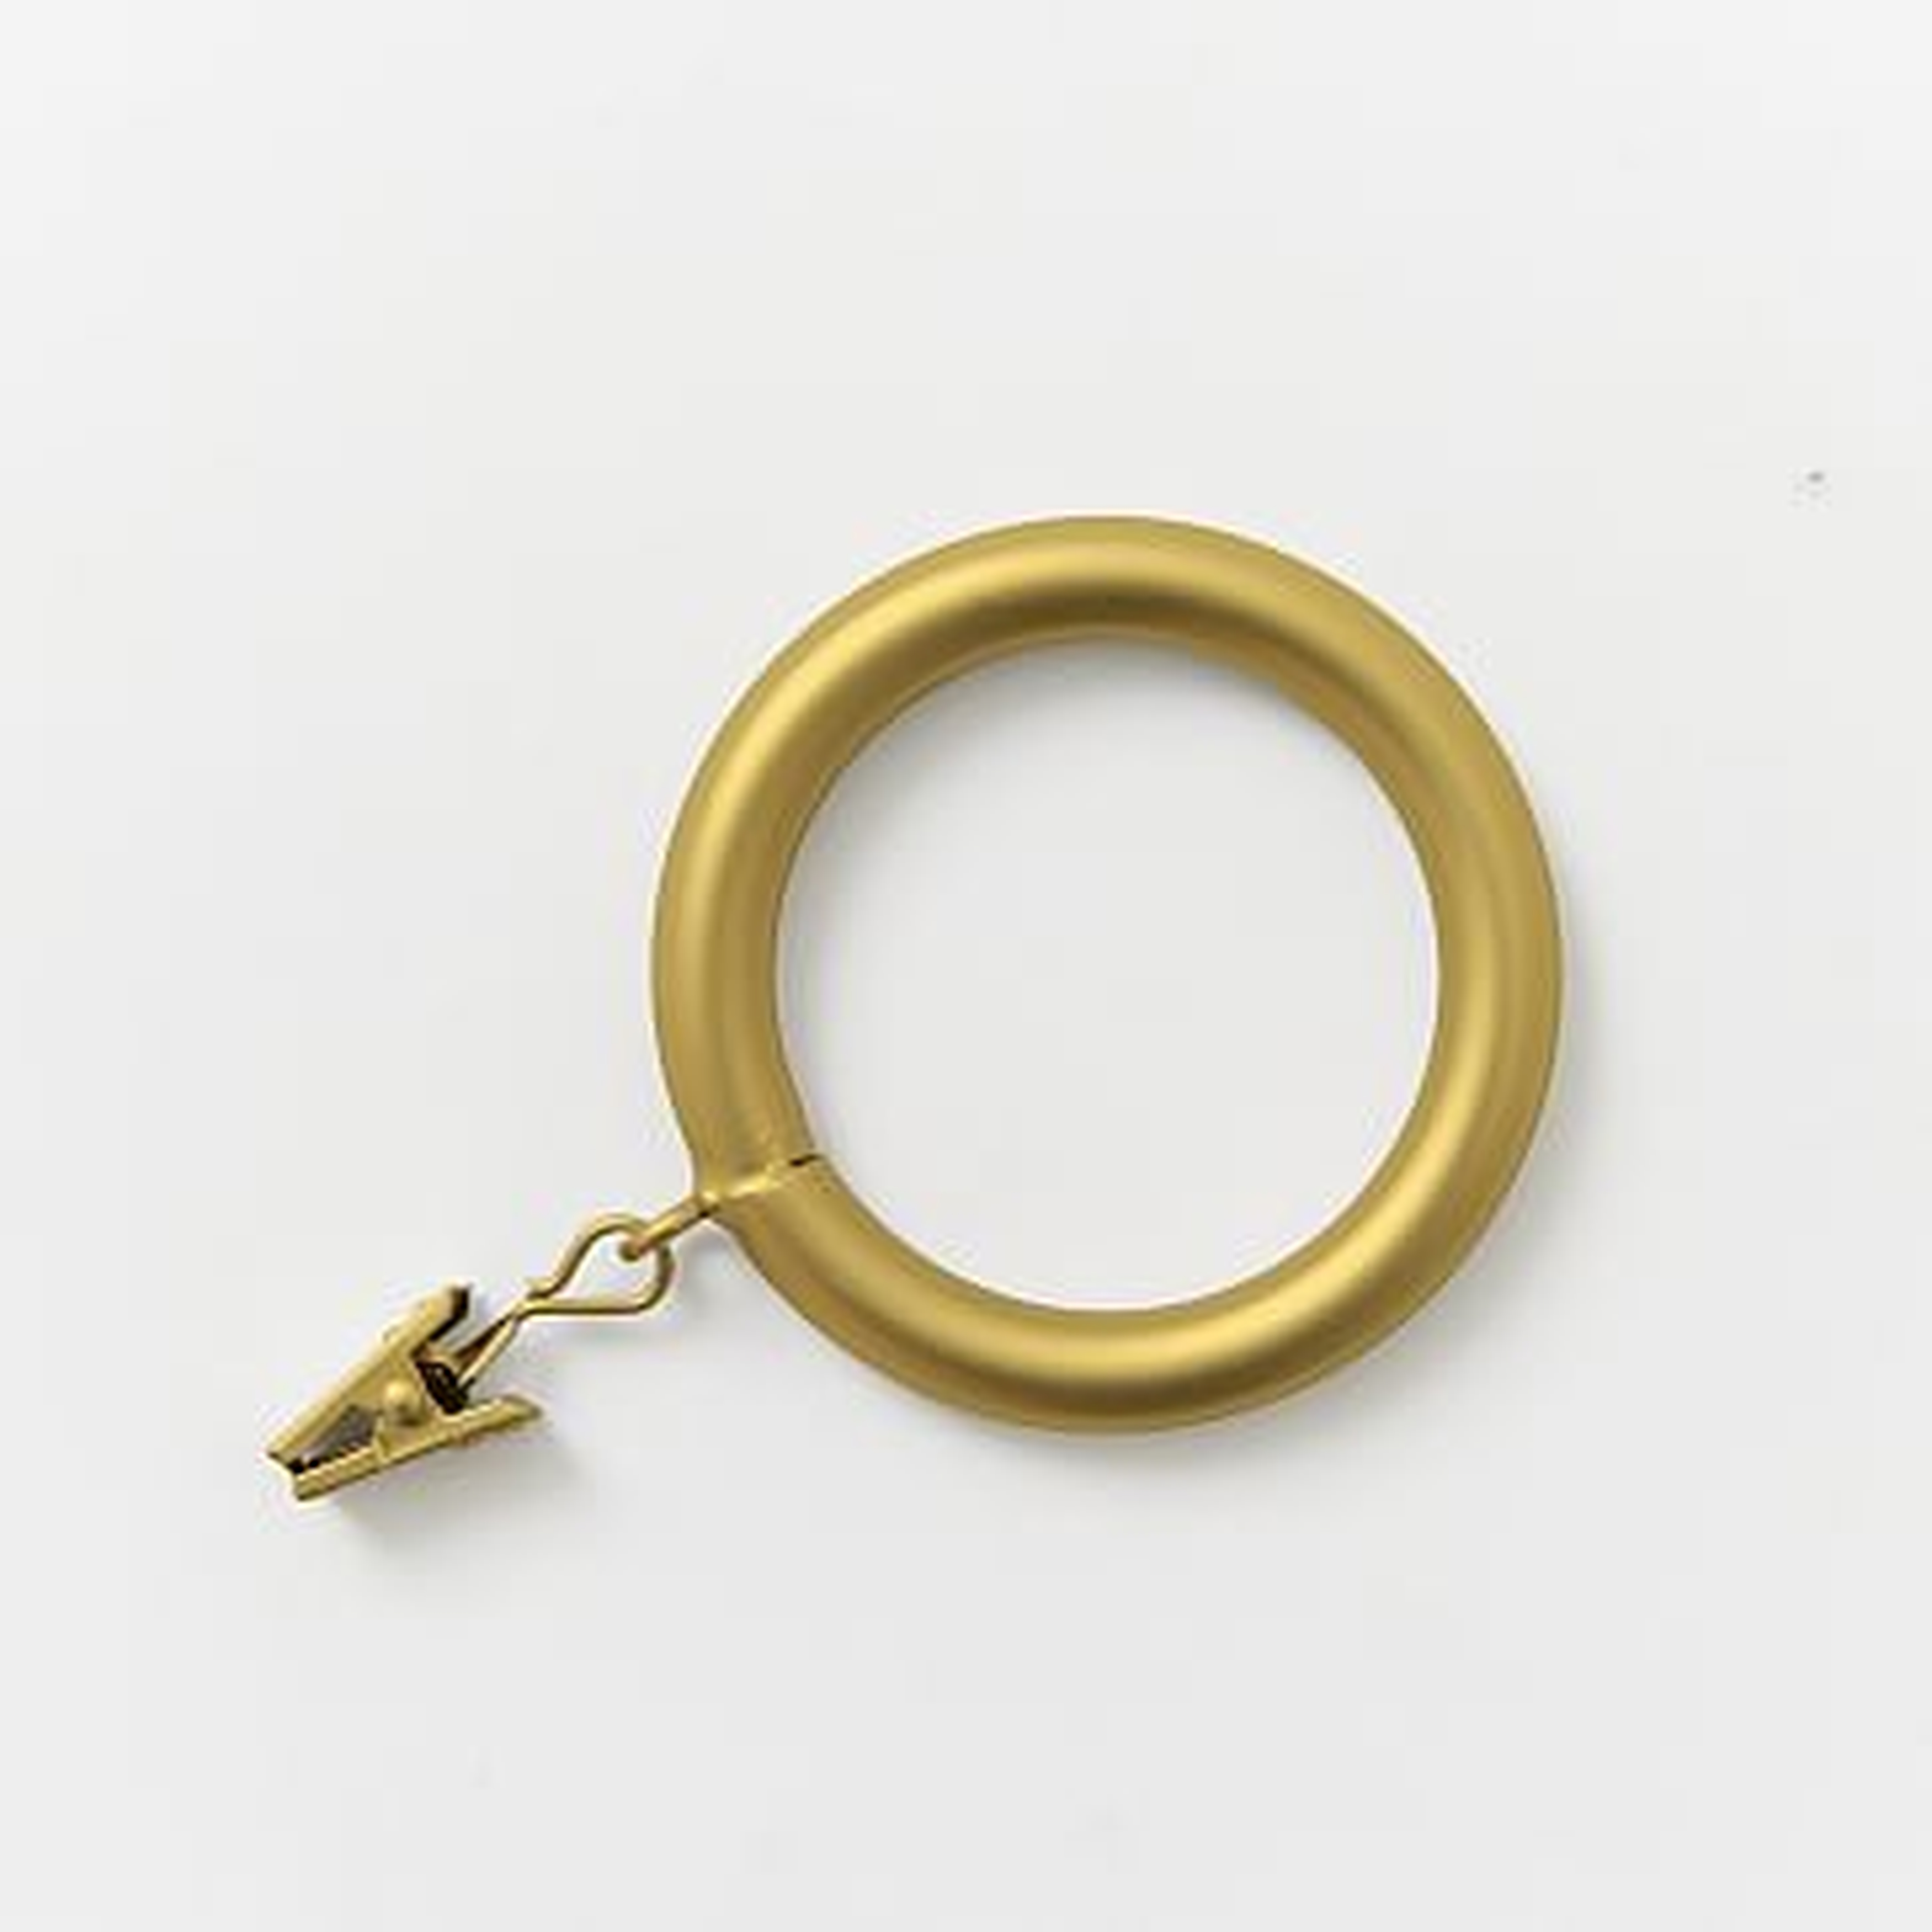 Oversized Metal Curtain Ring With Clip, Set of 7, Antique Brass - West Elm